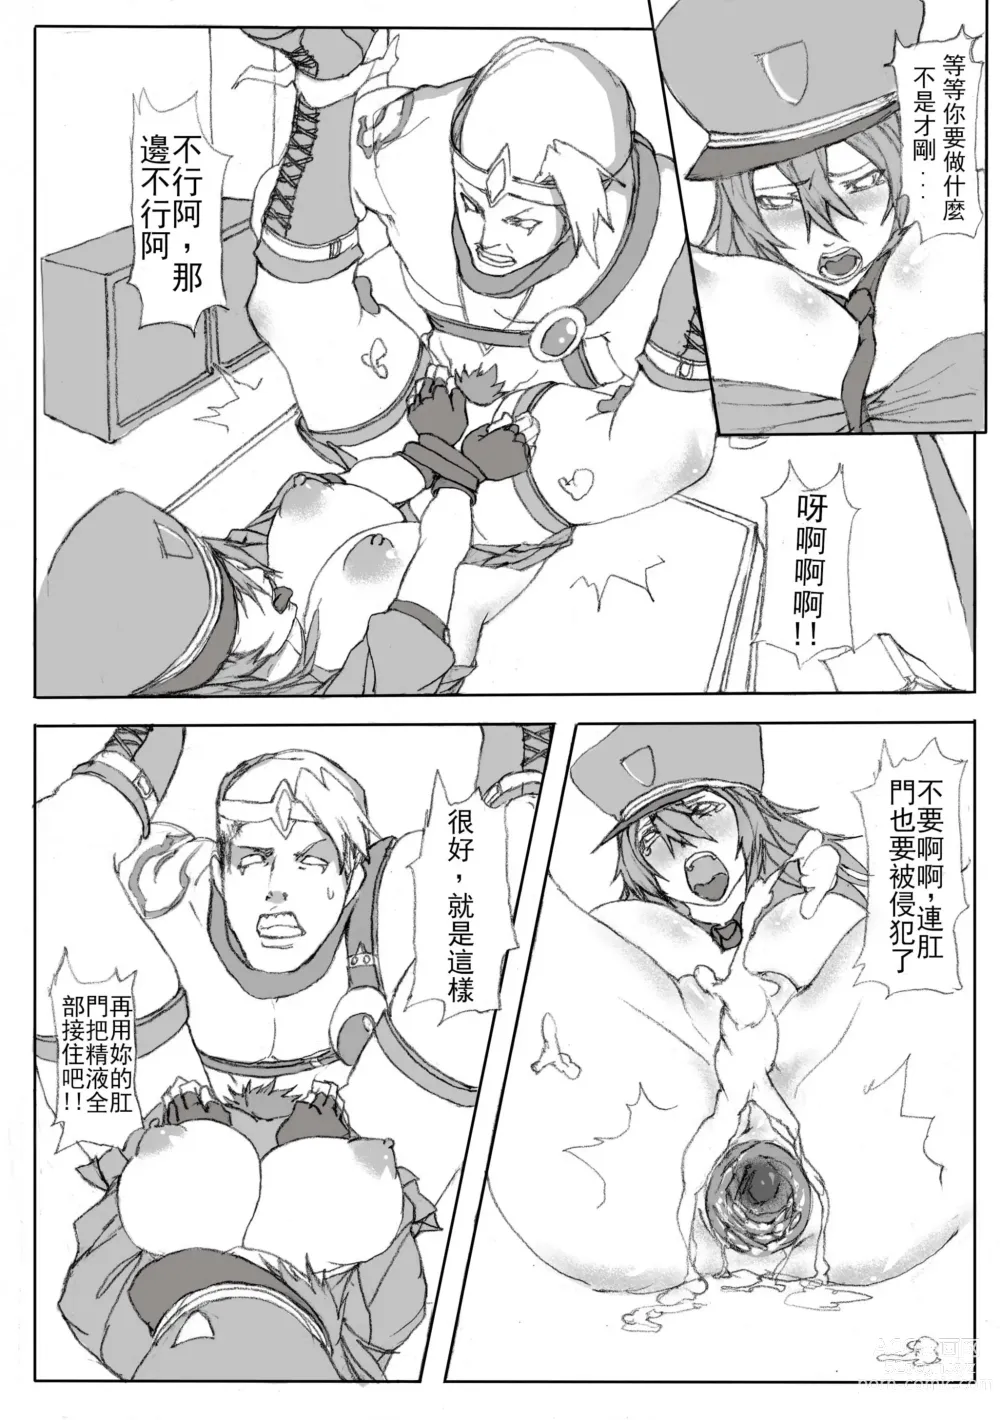 Page 17 of doujinshi 凱特琳壞壞 (League of Legends) [無修正]中文